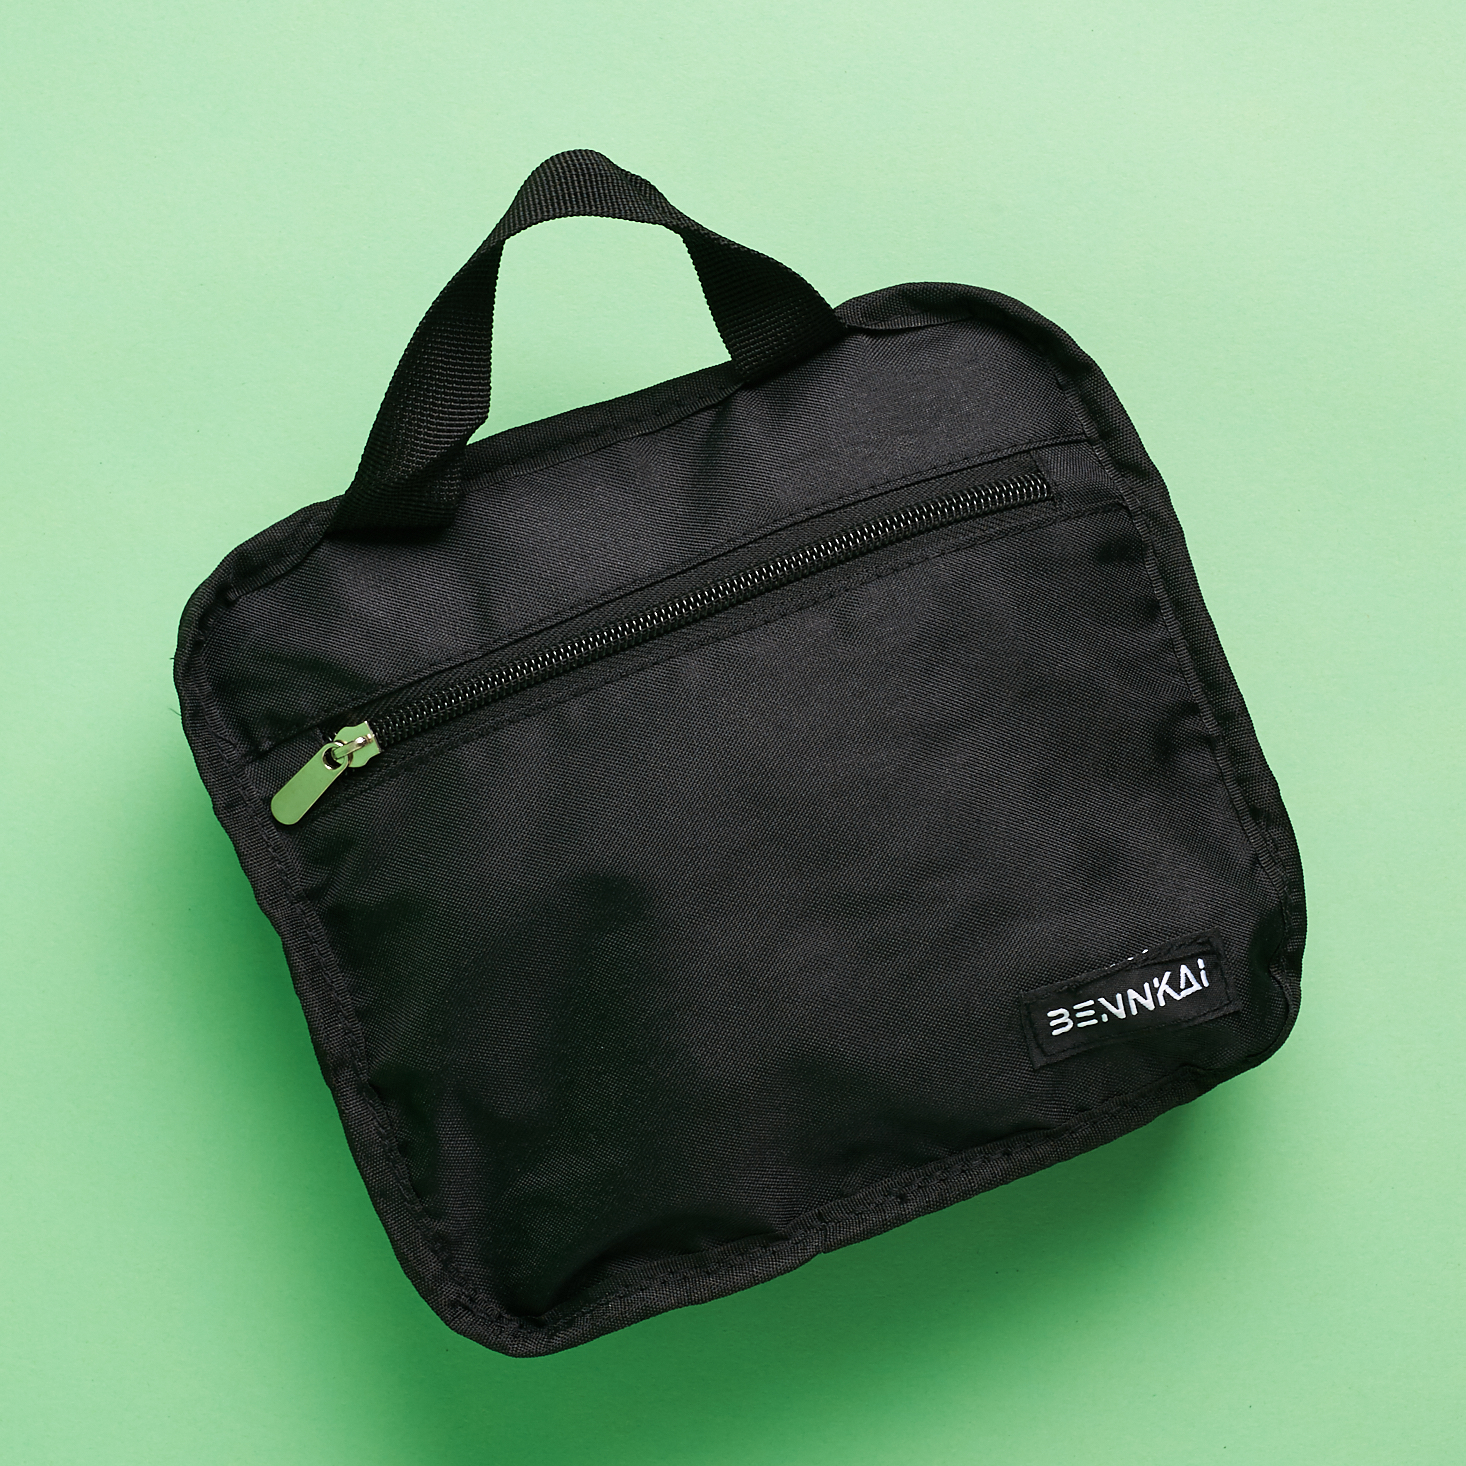 Bennkai Collapsible Backpack - packed into pouch